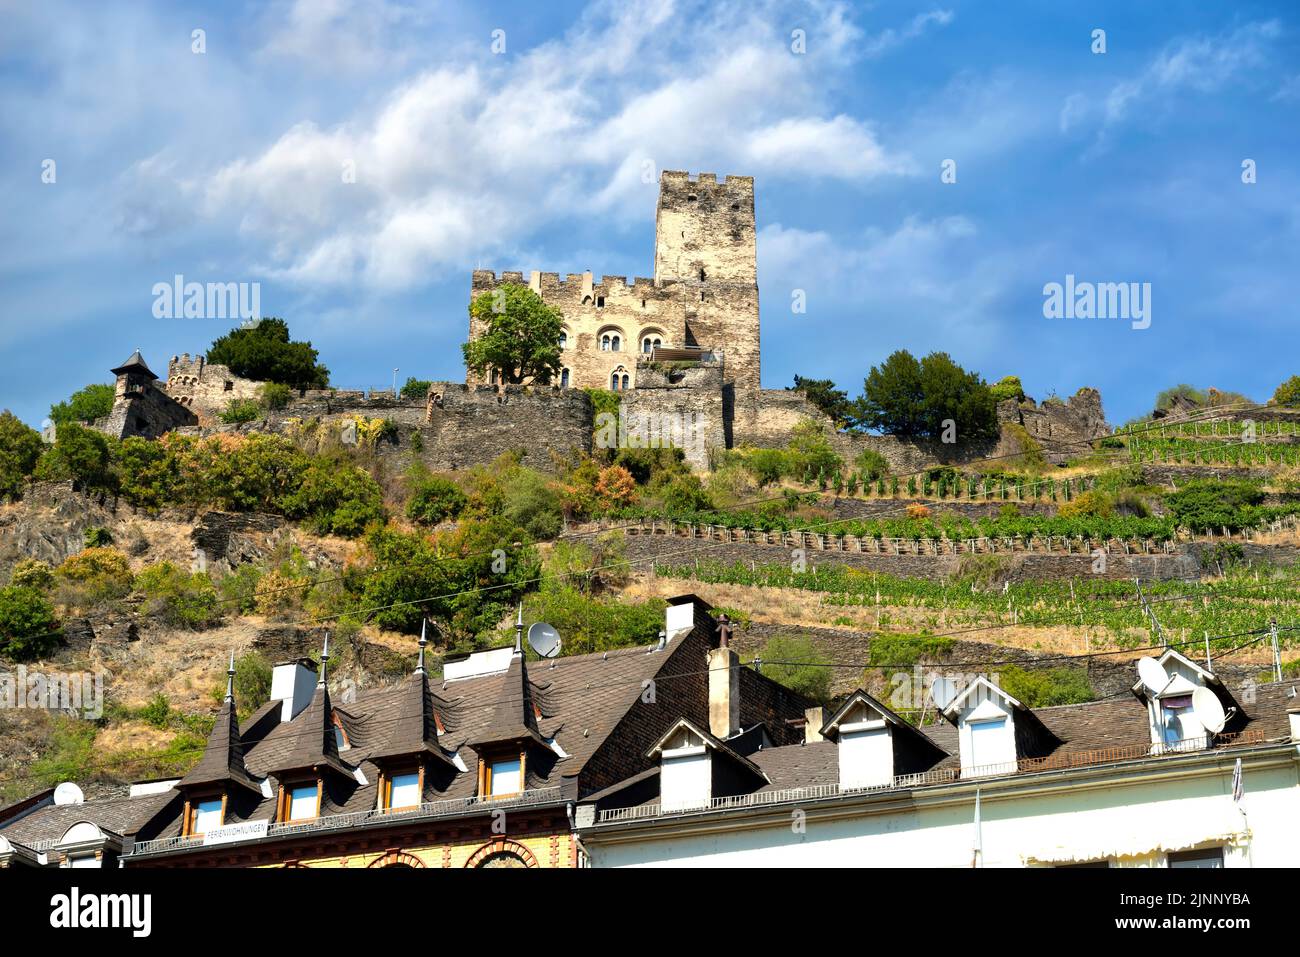 Gutenfels Fortress (German: Burg Gutenfels) in a summer landscape 110 m above the town of Kaub in Rhineland-Palatinate, Germany Stock Photo